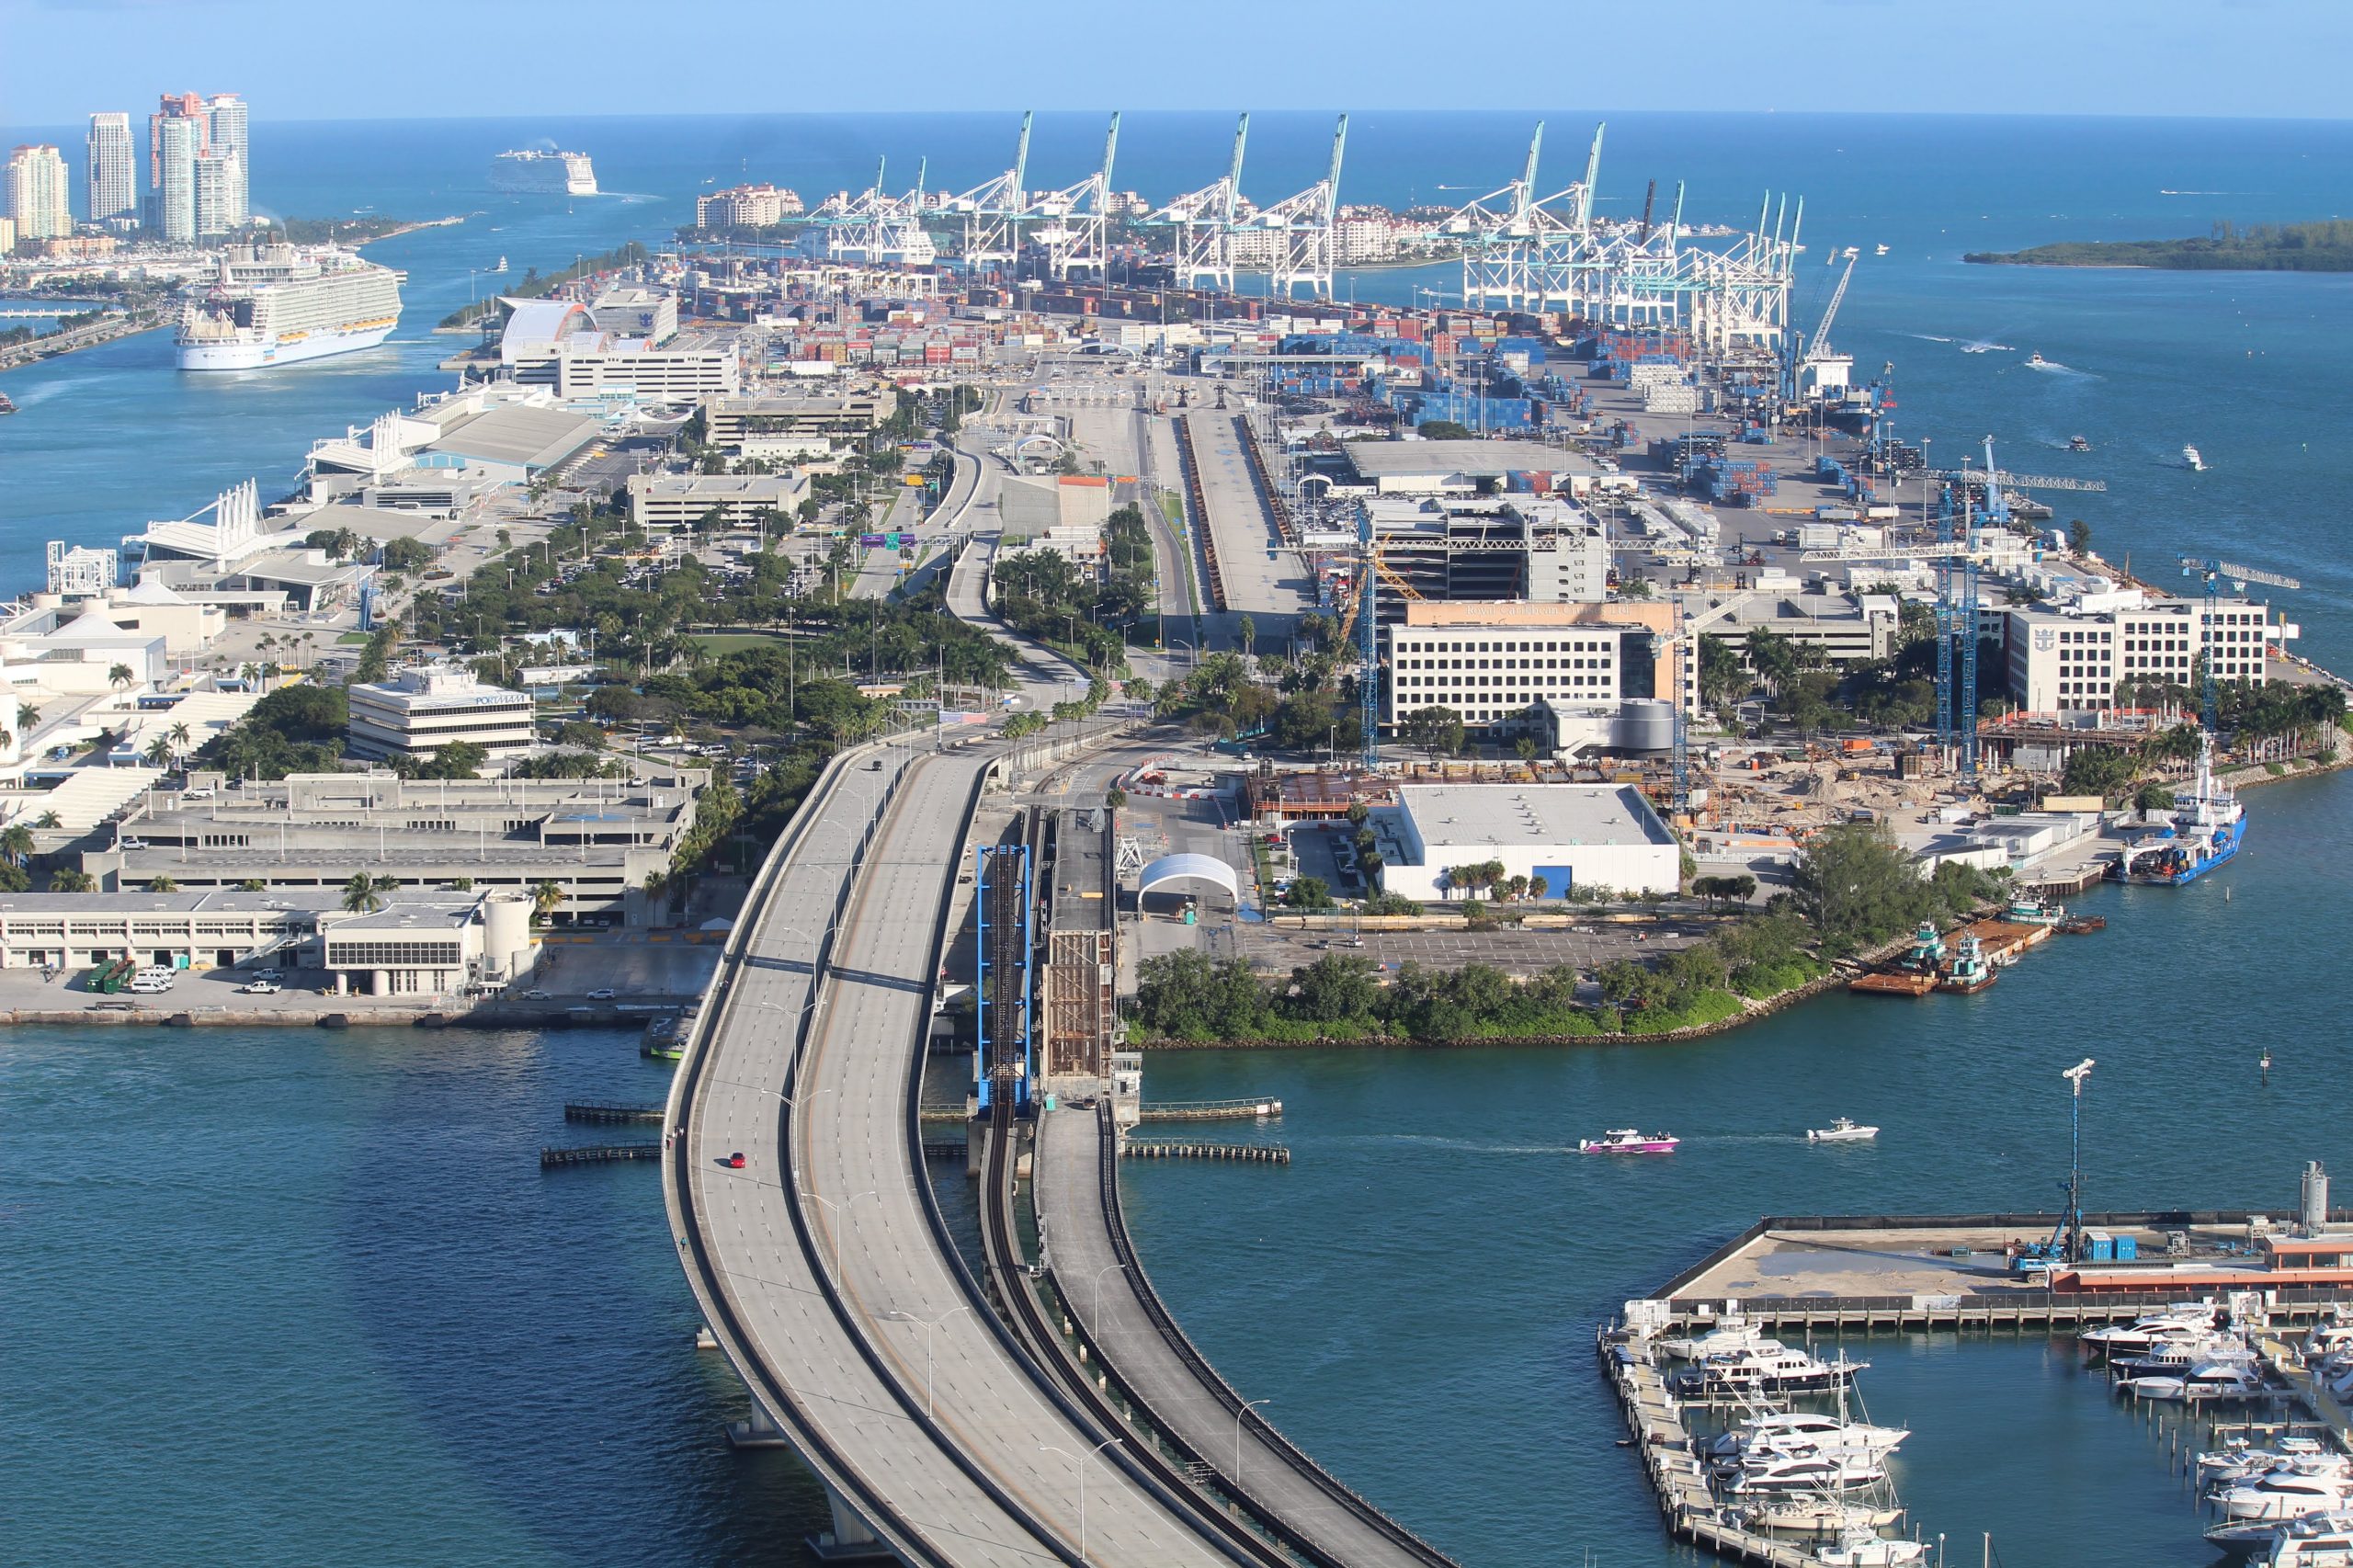 The Splendor of Downtown Miami Skyline and the Port of Miami… so Worthy of a Visit. photo